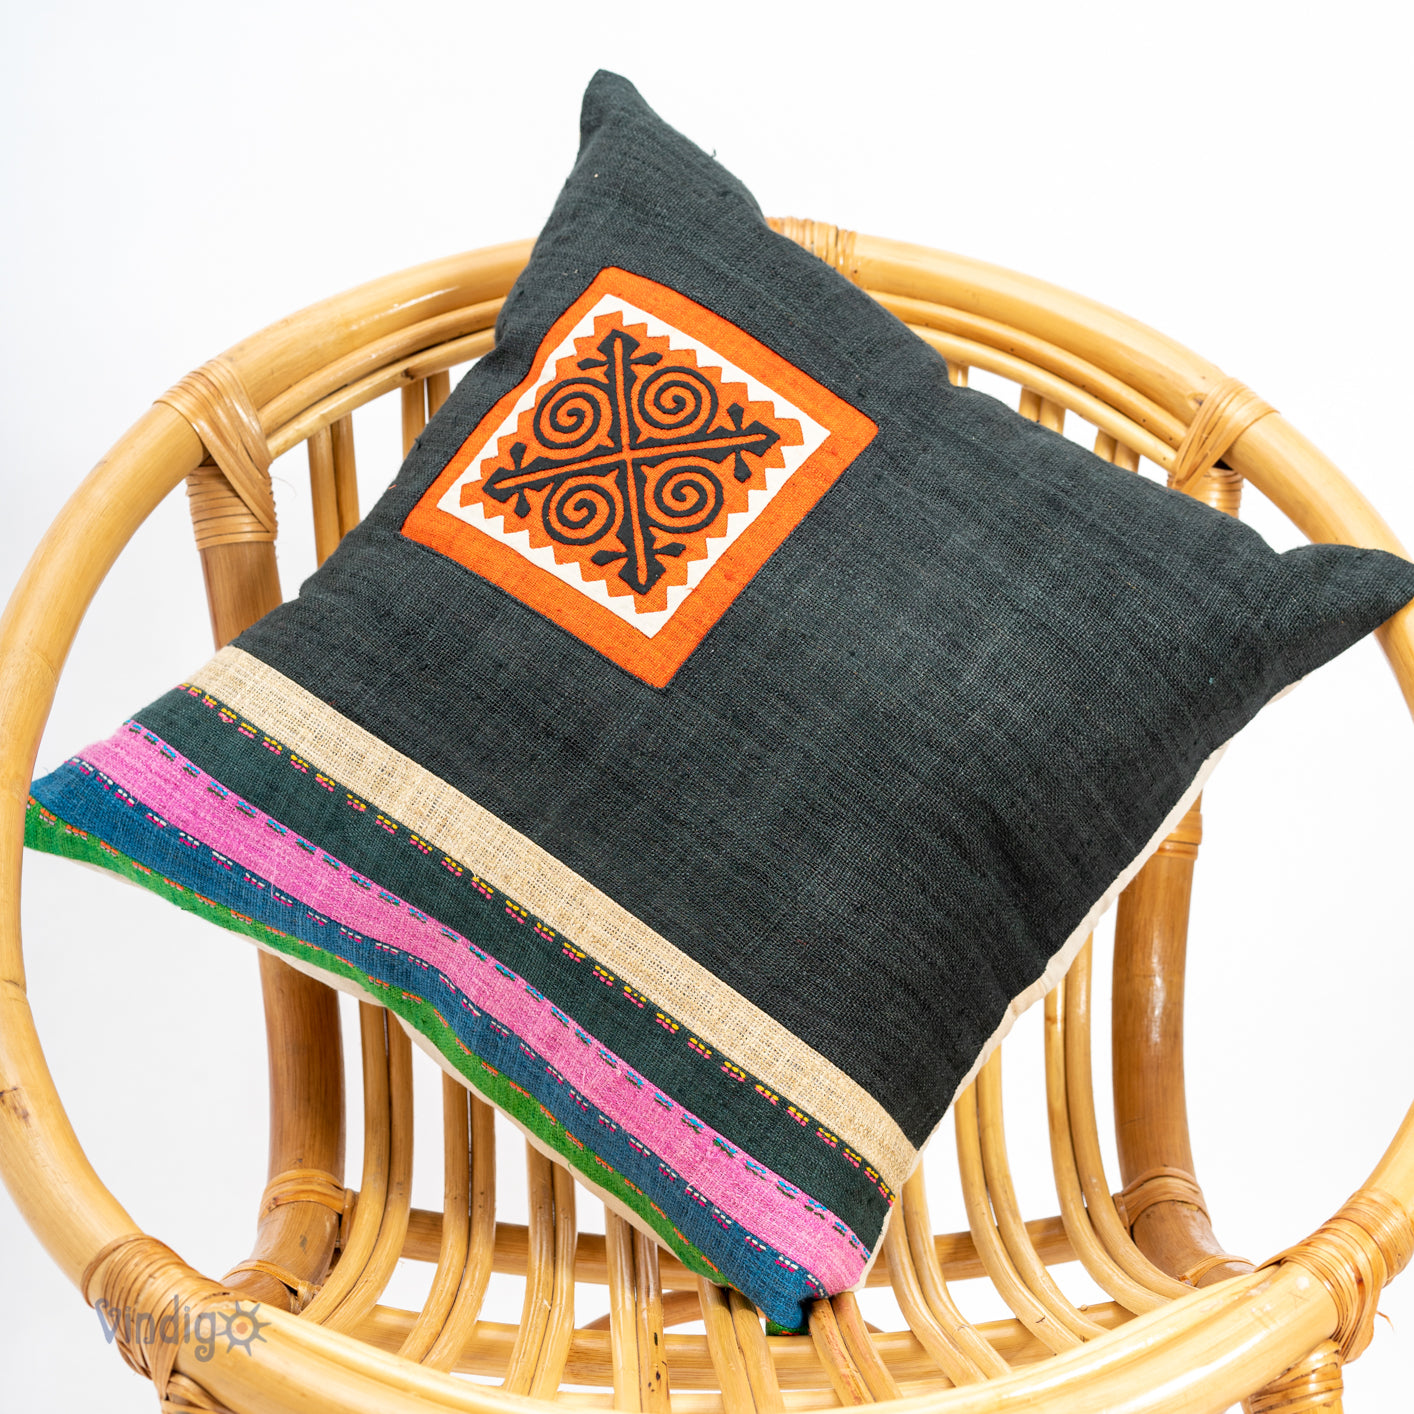 Black Hemp Cushion Cover with stripes in different colors, hand-stitches on the front